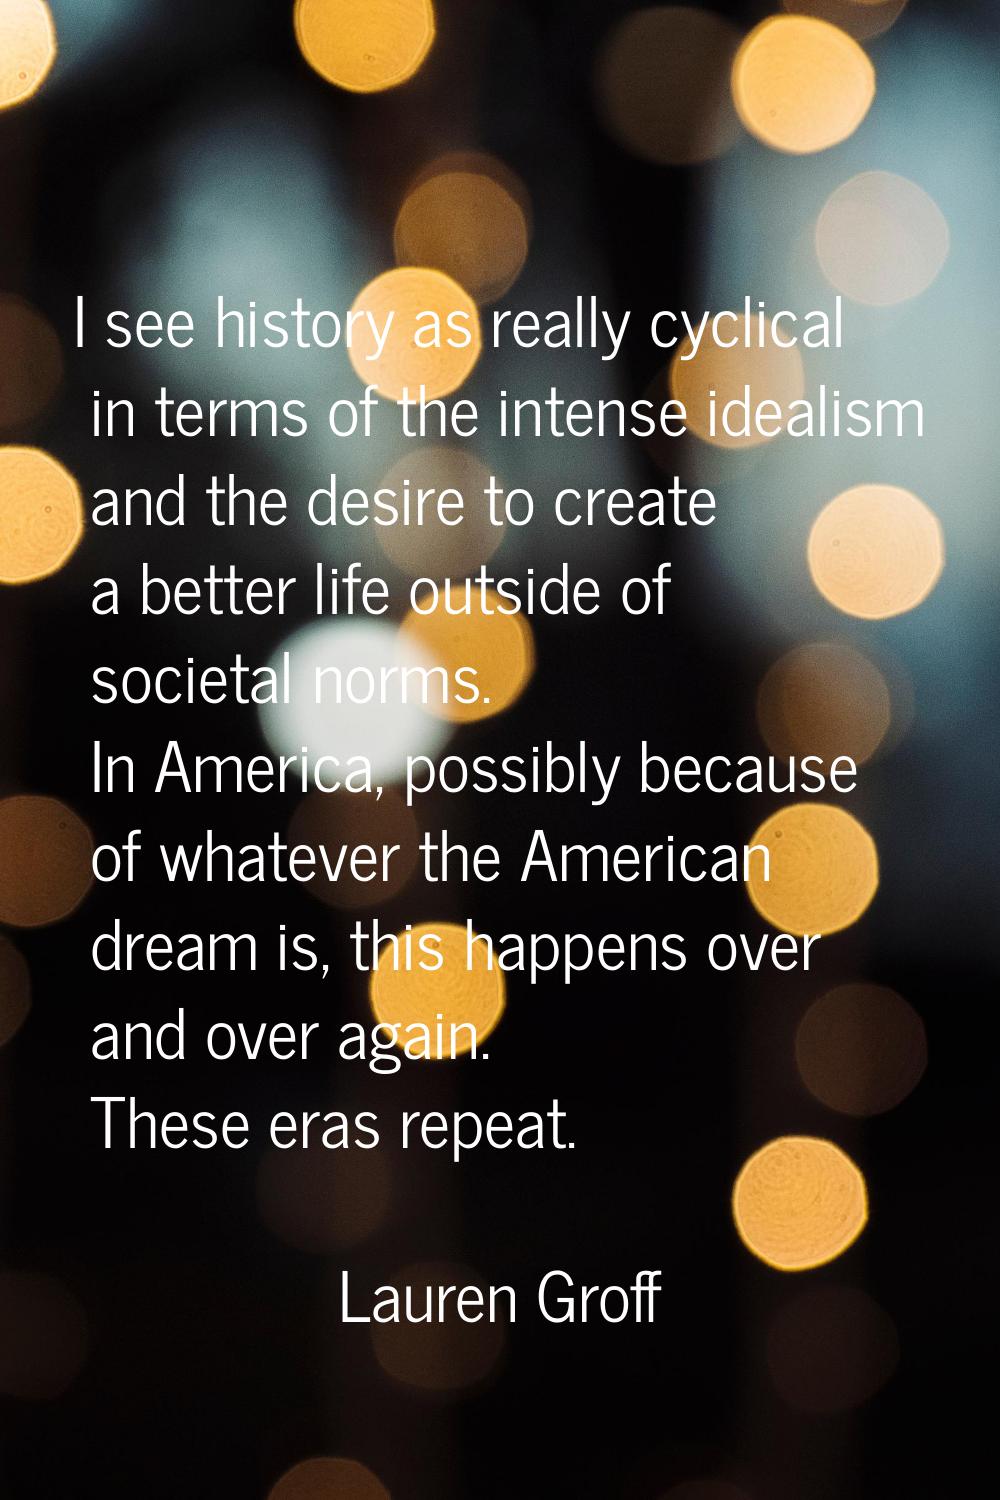 I see history as really cyclical in terms of the intense idealism and the desire to create a better